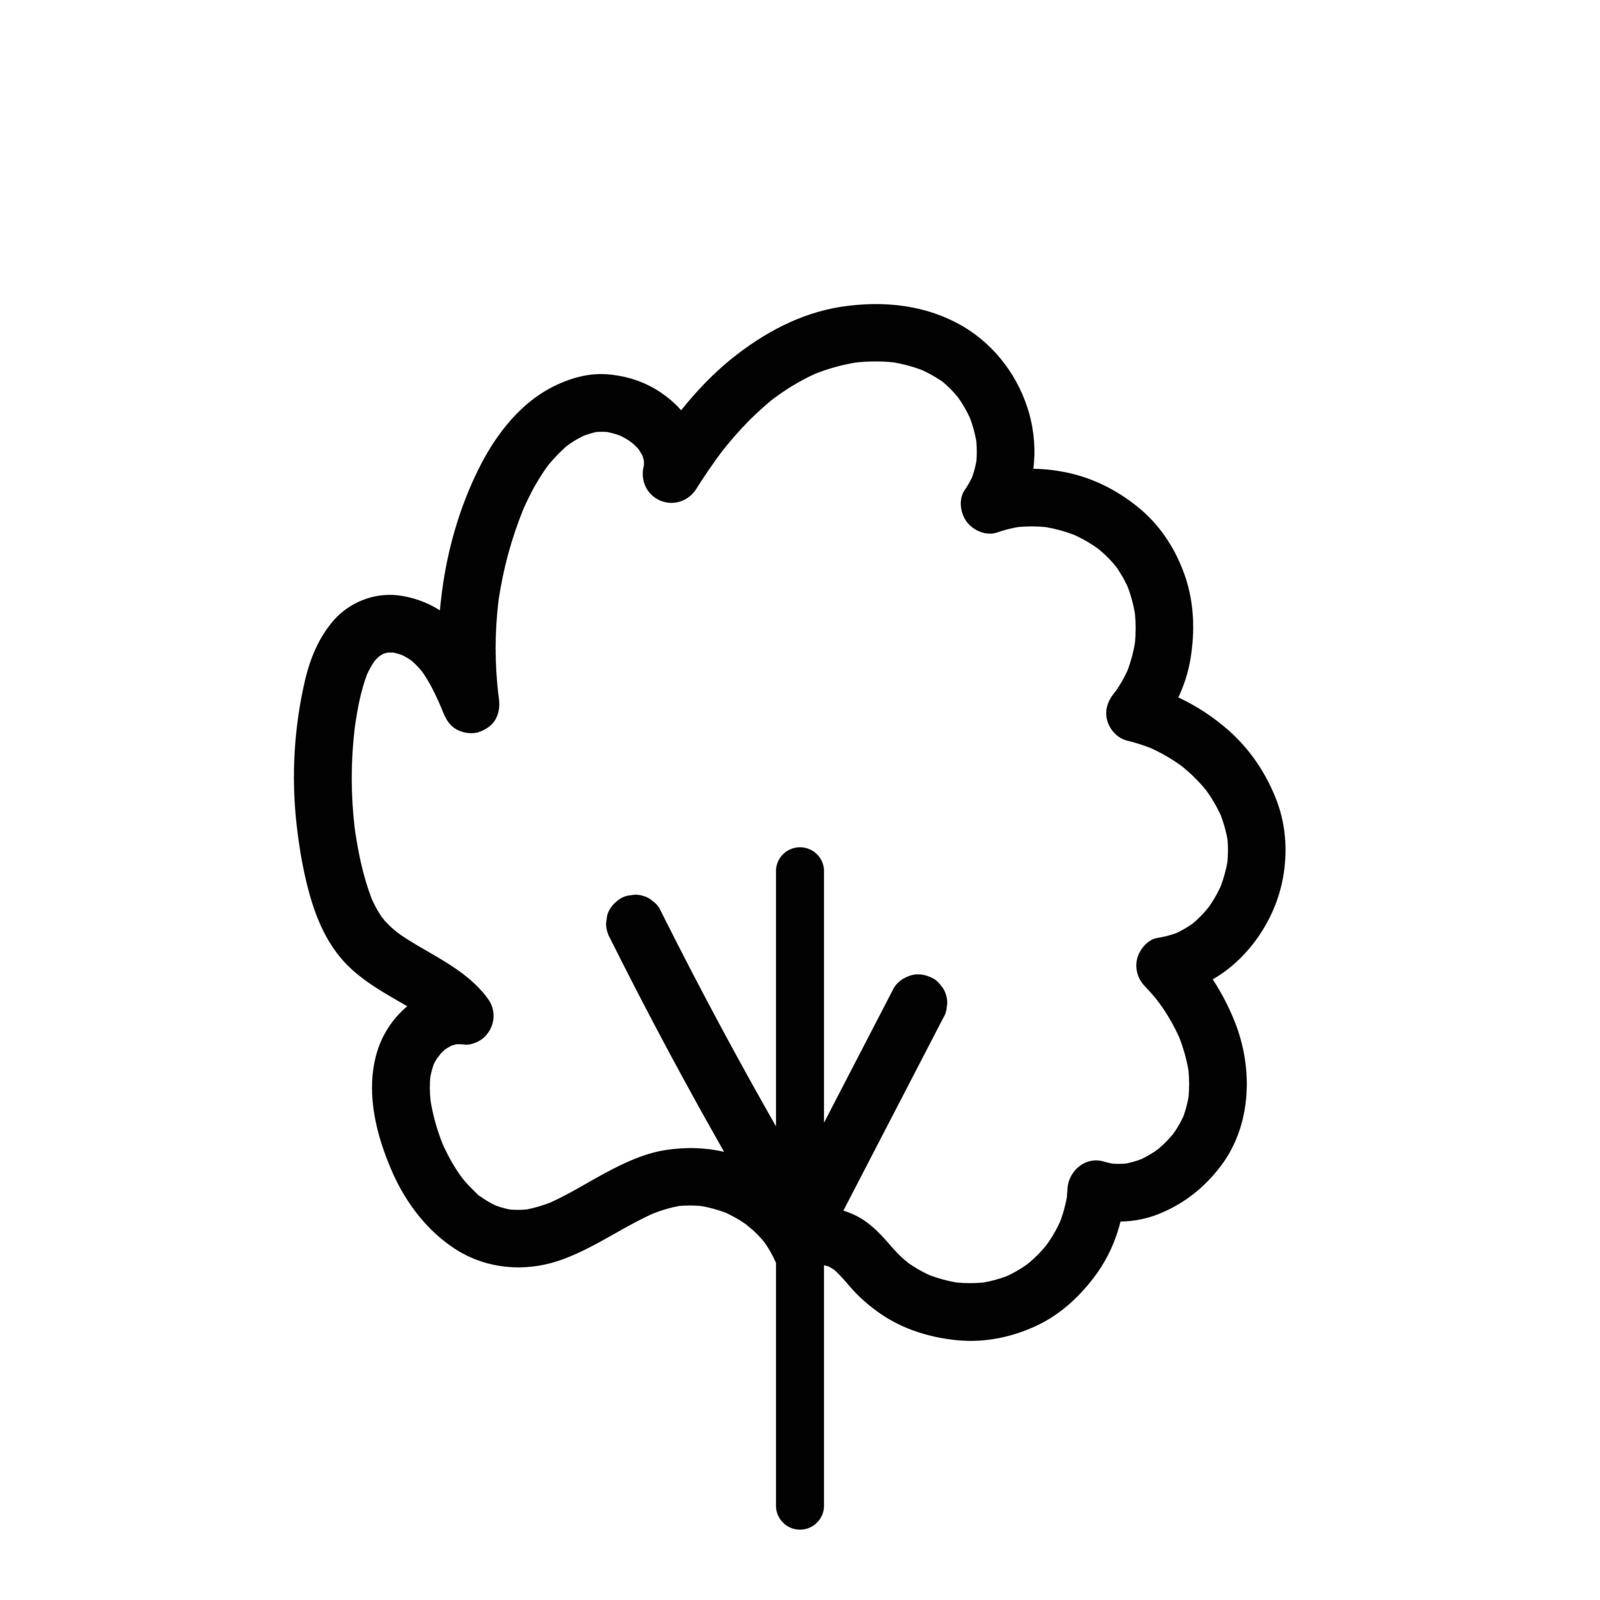 Black and white template tree icon. Vector symbol sign isolated on white background. Trees flat line icons set. Plants, landscape design. Business idea concept by allaku